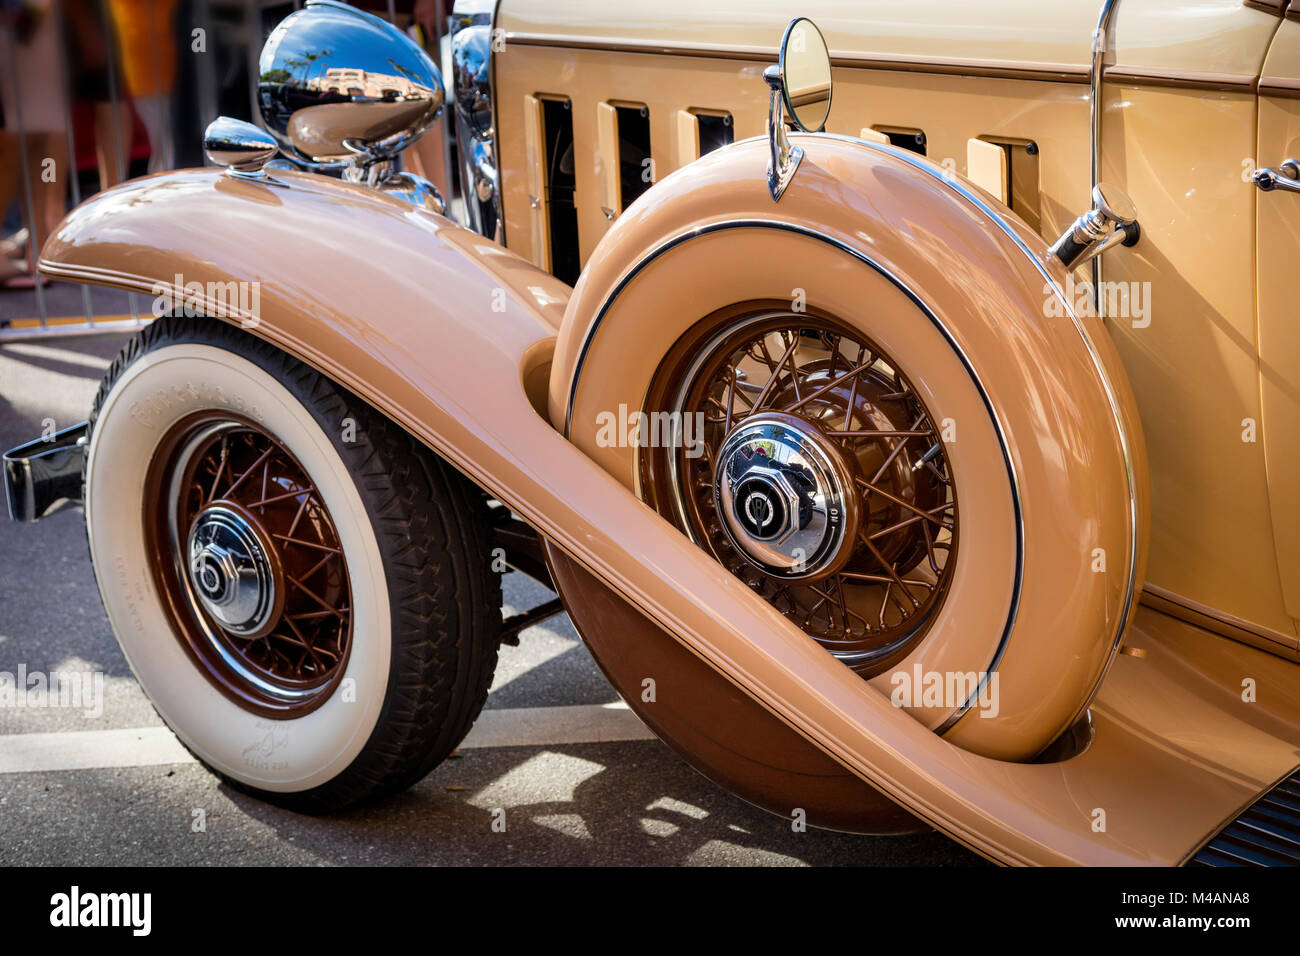 Perfectly maintained 1932 Cadillac on display at 'Cars on 5th' autoshow, Naples, Florida, USA Stock Photo